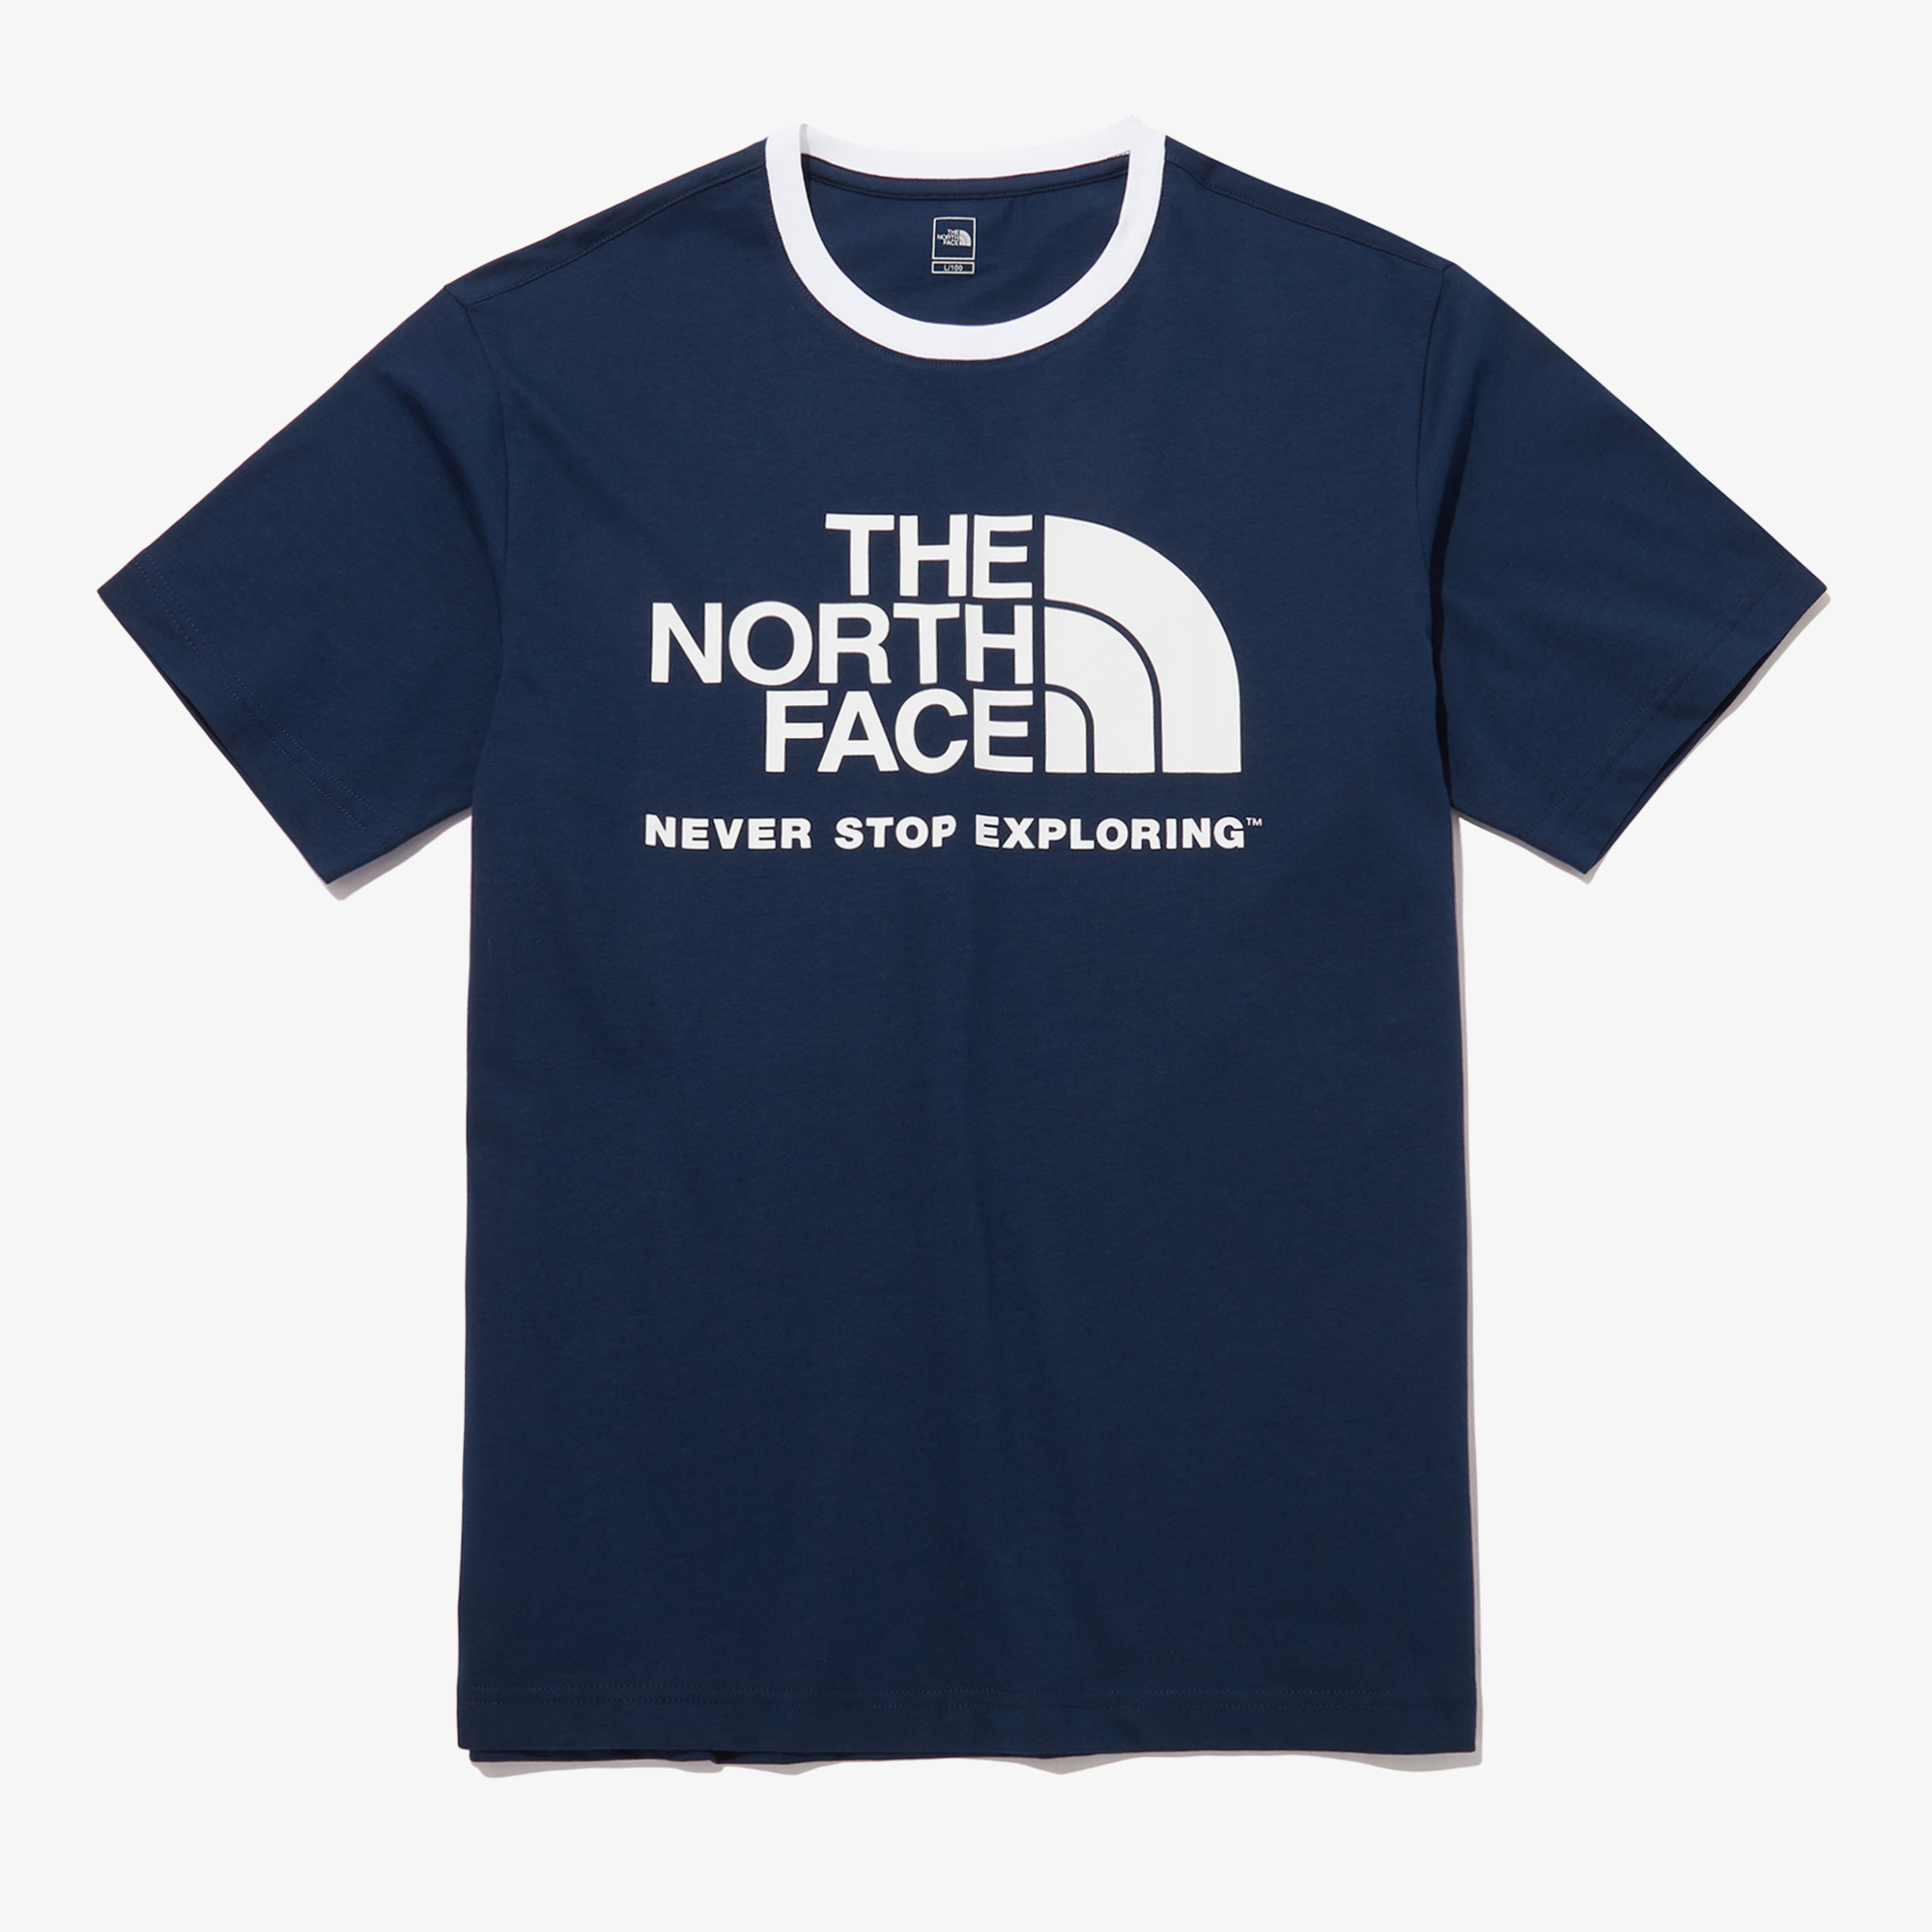 The North Face Men's T-Shirt Short Sleeve Half Dome Small, 57% OFF